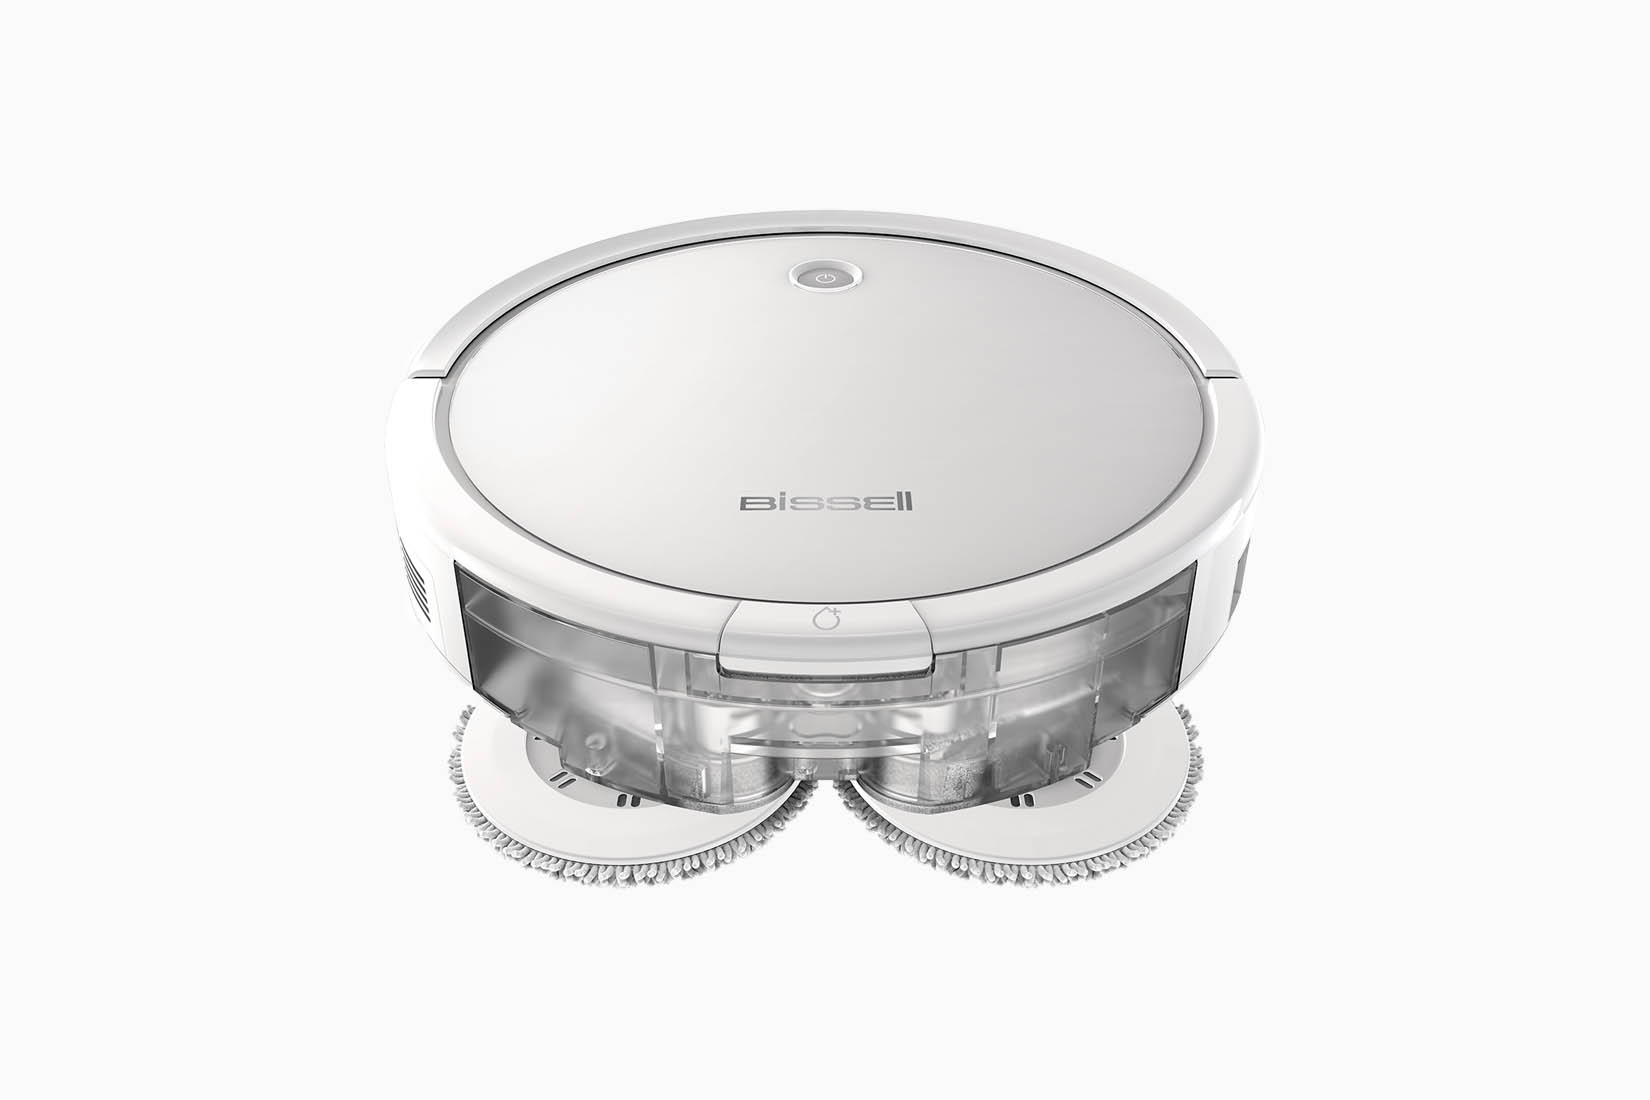 best robot vacuum bissell spinwave review Luxe Digital